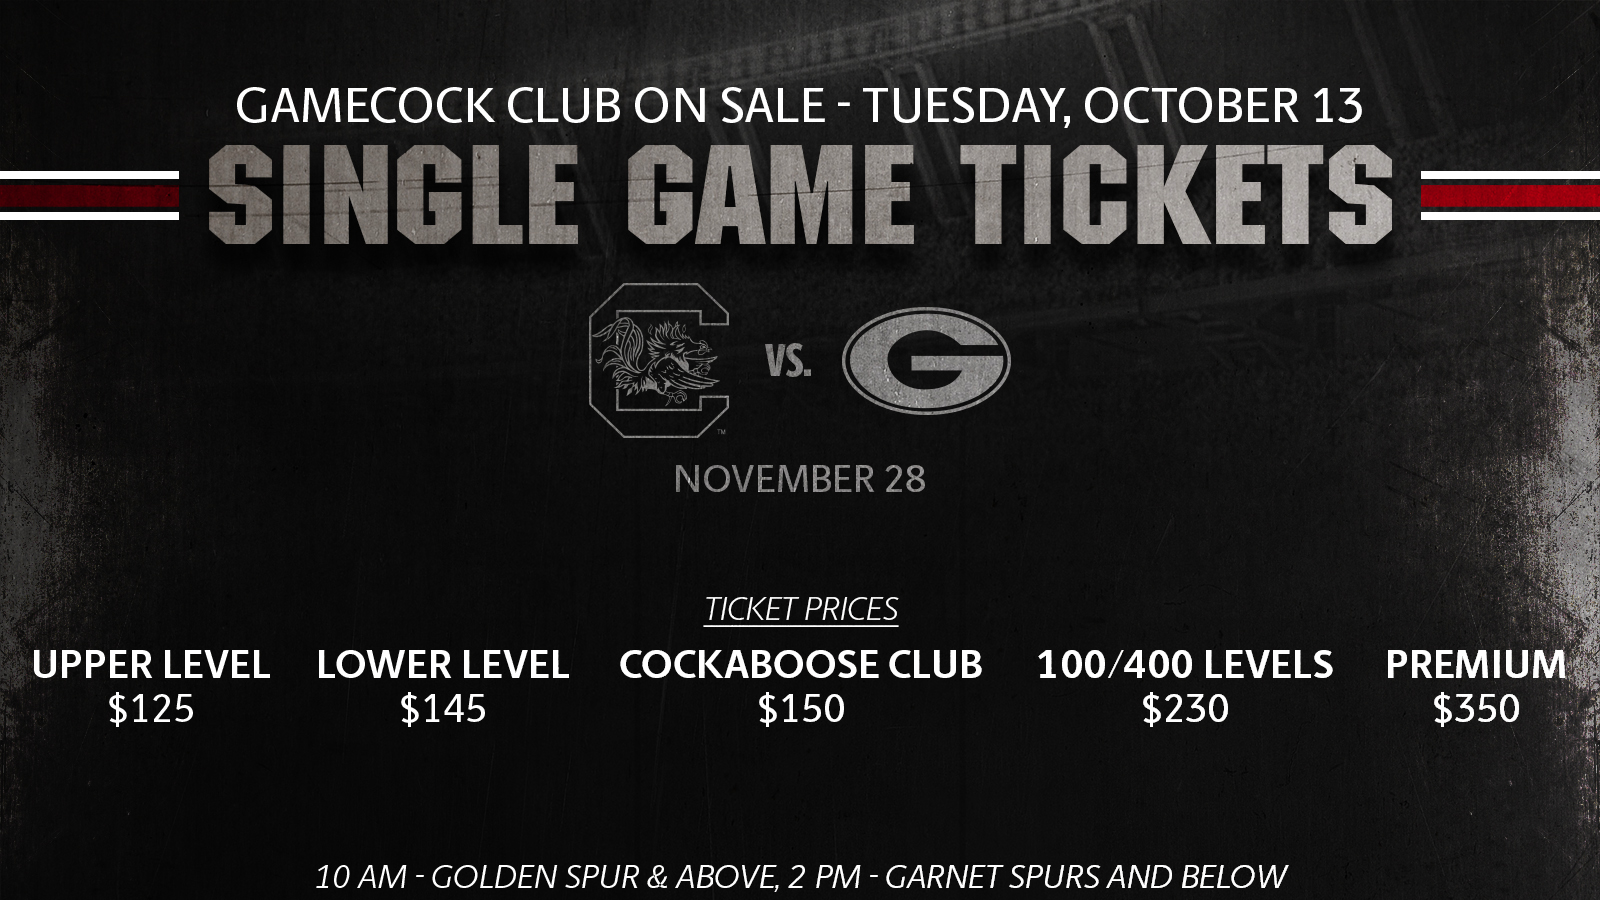 Limited Tickets to Georgia Game Exclusively Available to Gamecock Club members